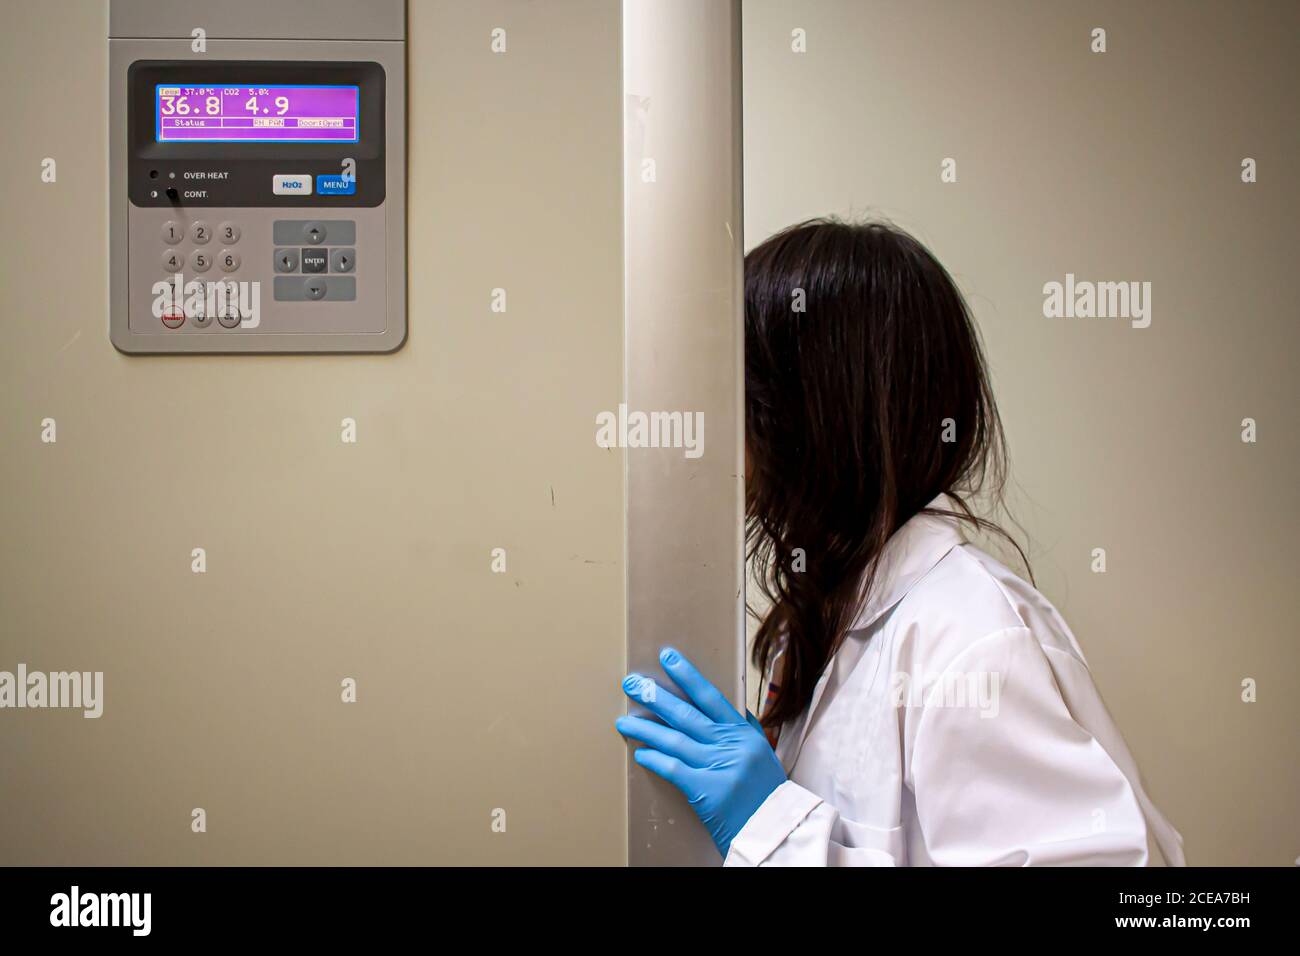 A woman scientist wearing white laboratory coat and blue nitrile gloves is opening the door of fully electronic 37 degree incubator to check the growt Stock Photo